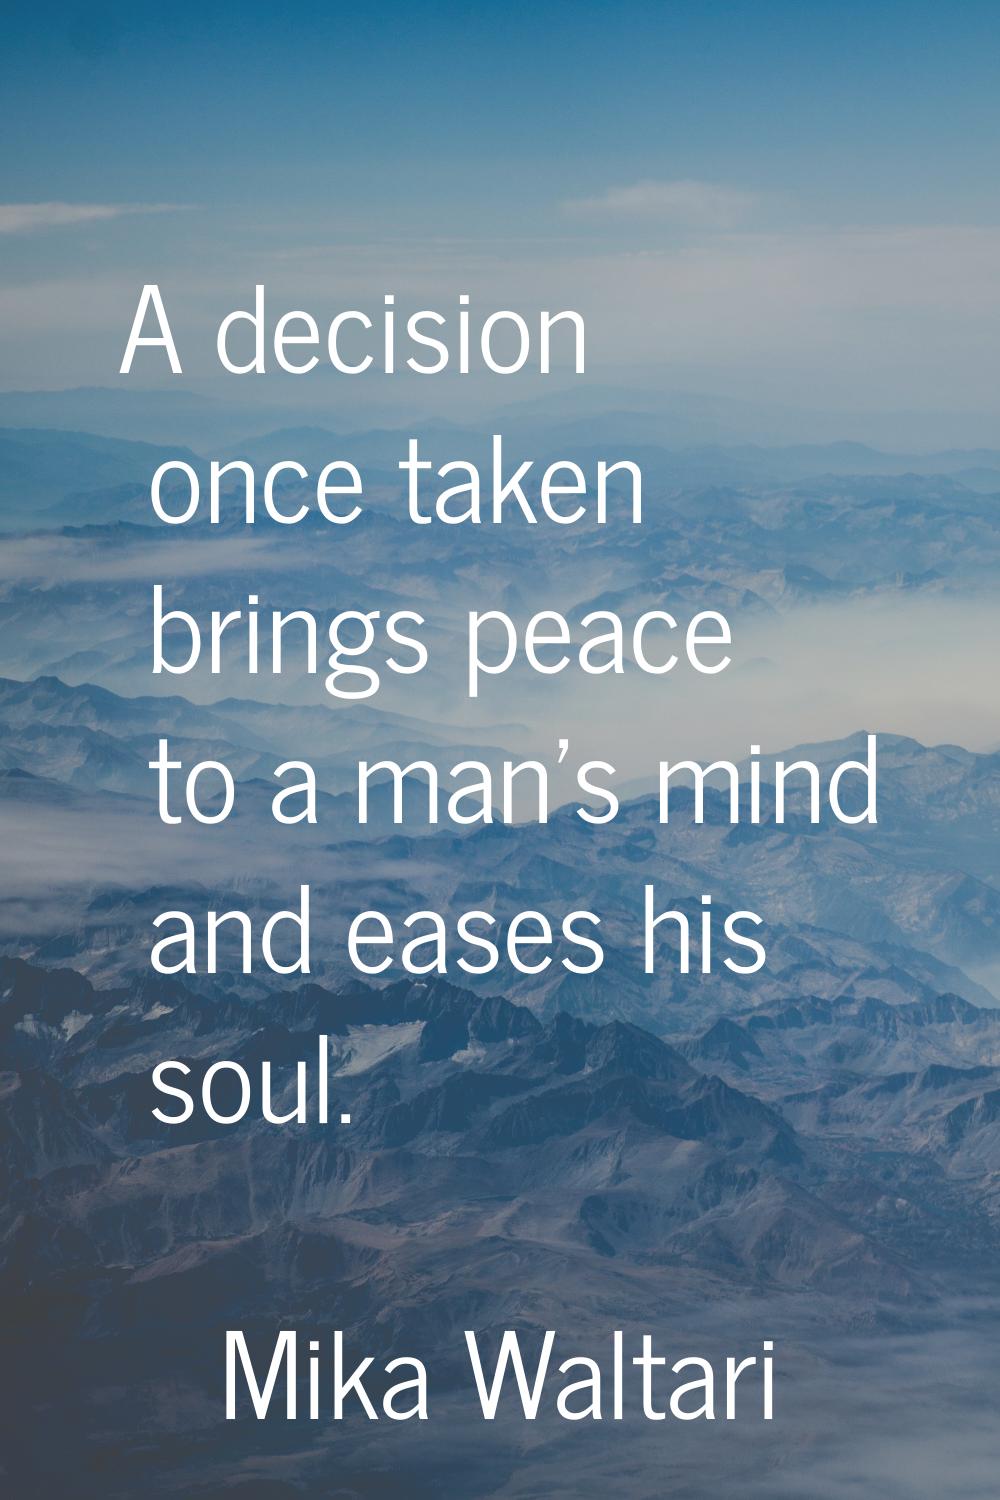 A decision once taken brings peace to a man's mind and eases his soul.